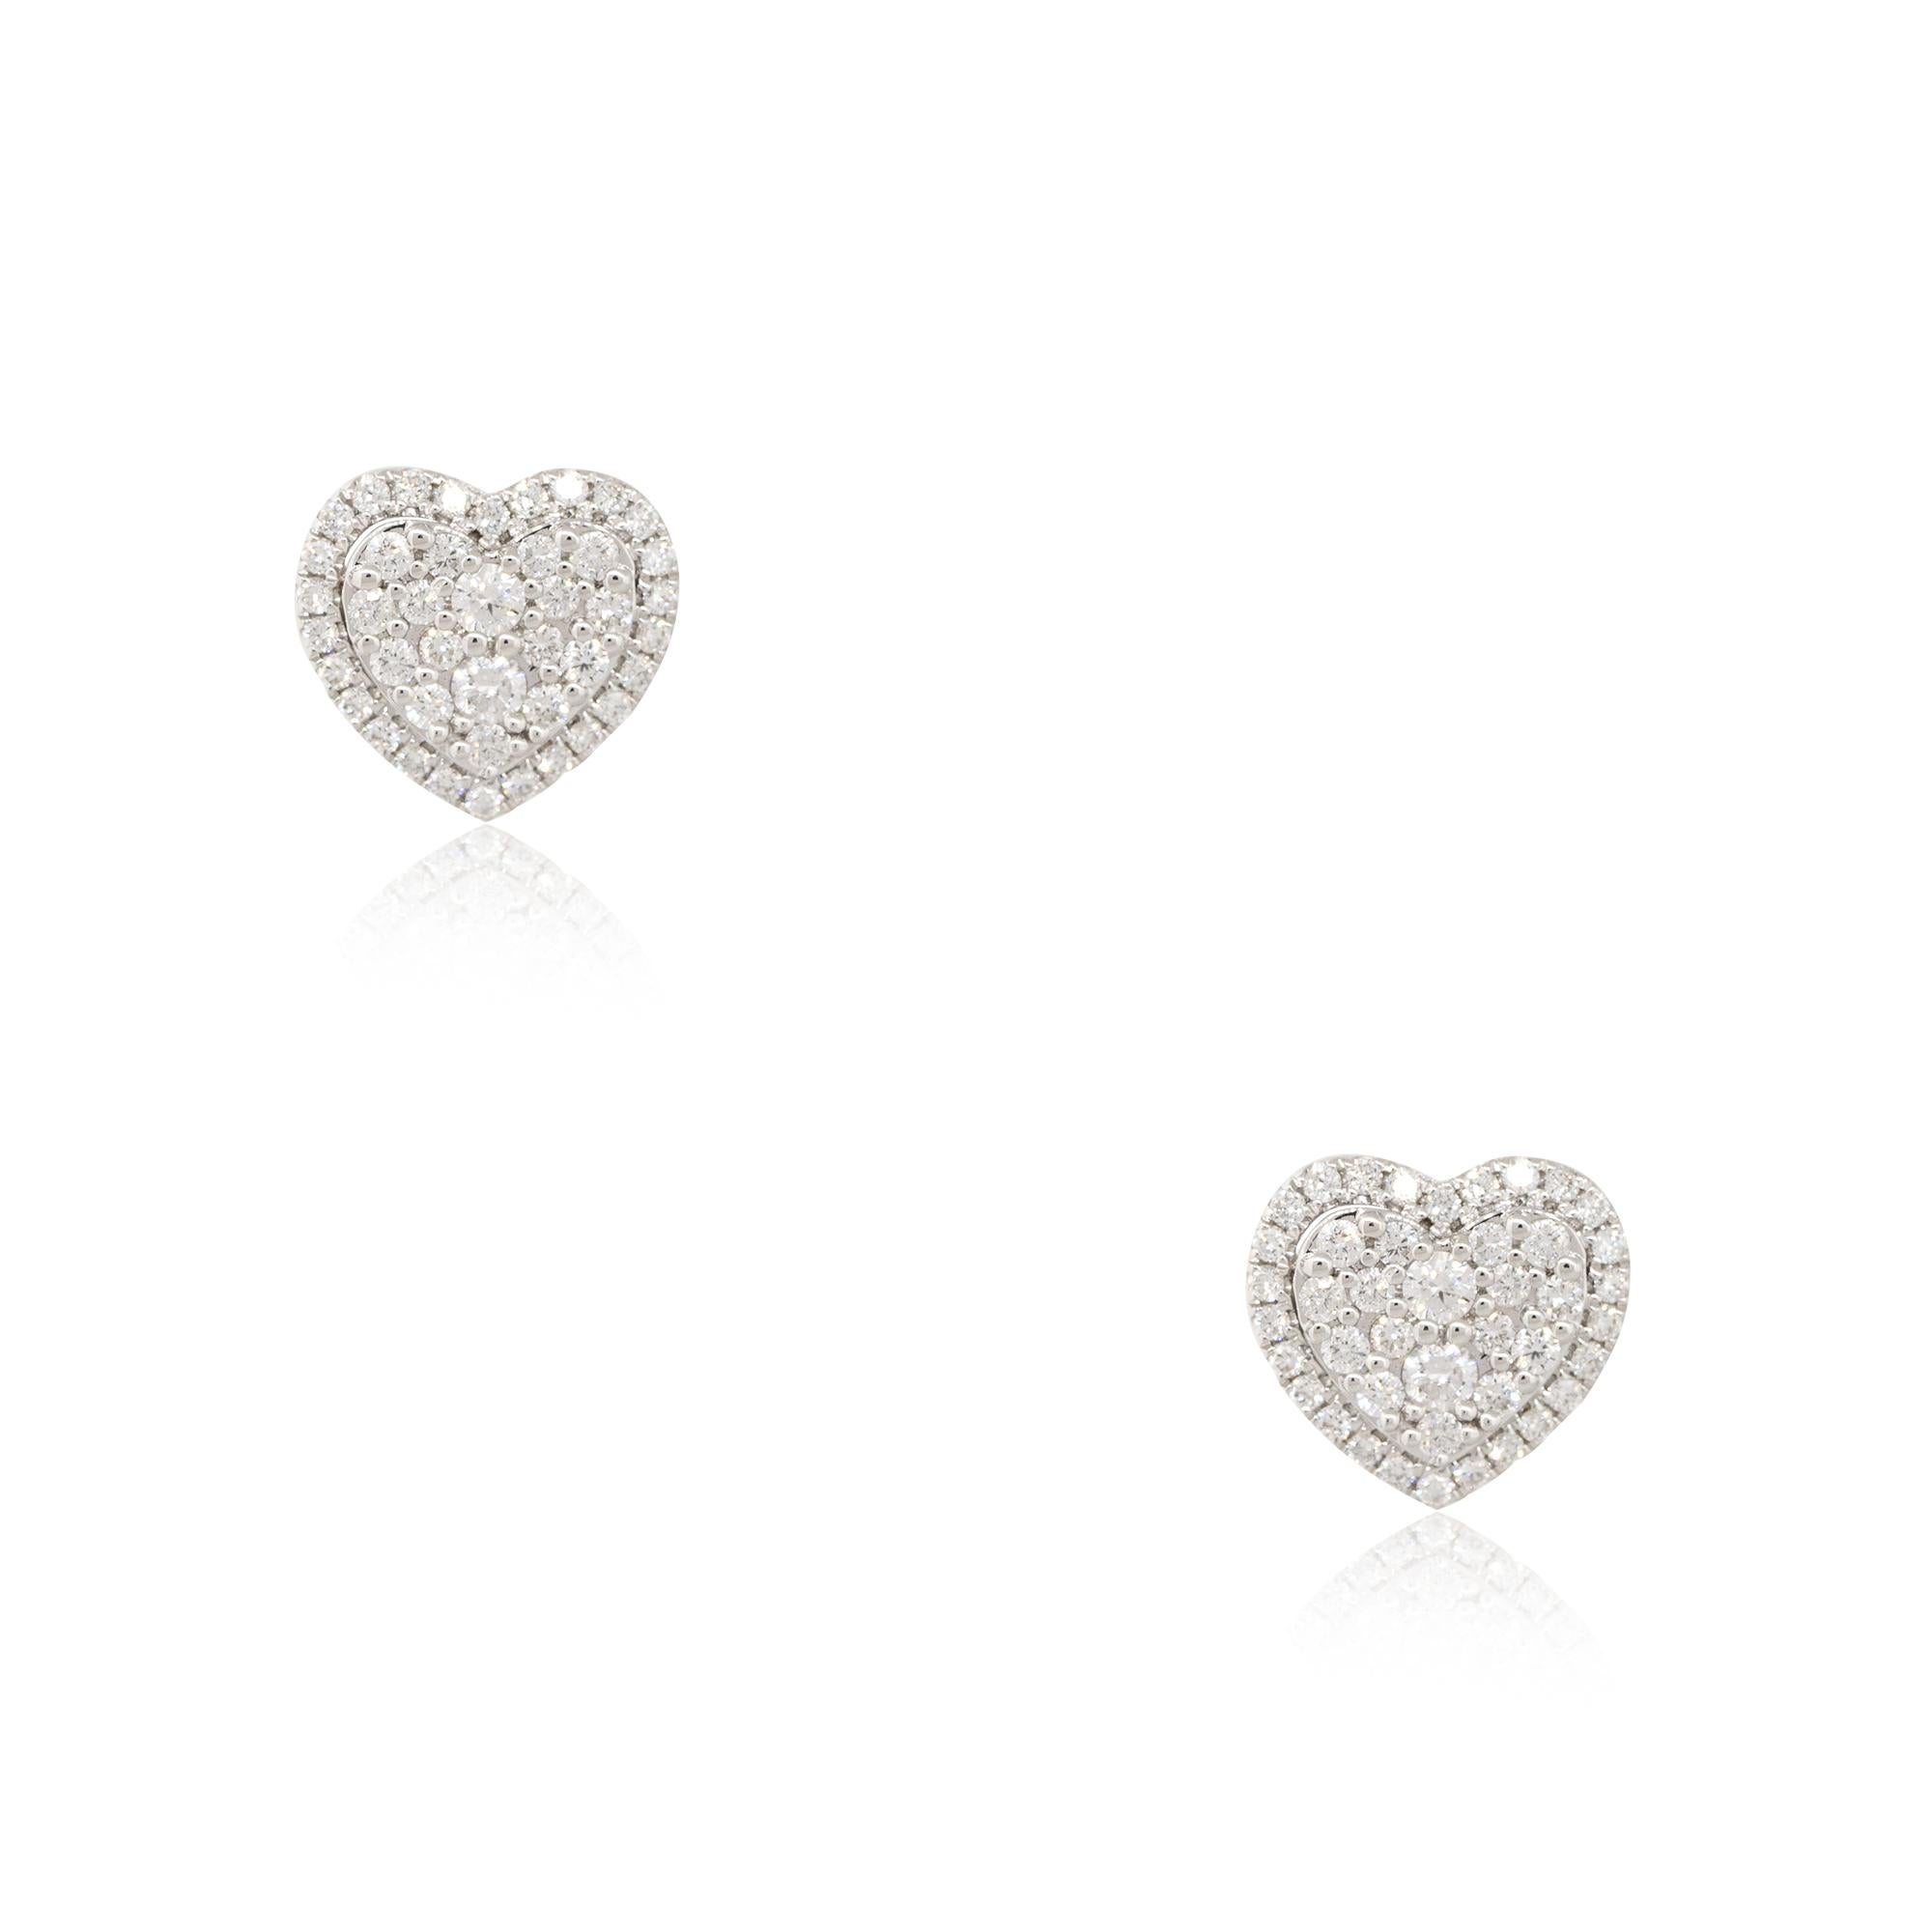 18k White Gold 0.97ctw Diamond Halo Pave Heart Stud Earrings
Material: 18k White Gold
Diamond Details: Approximately 0.97ctw of Pave Set Diamonds
Item Dimensions: 12.3mm x 3.3mm x 11.4mm 
Item Weight: 4.66g (3.1dwt)
Earring Backs: Friction